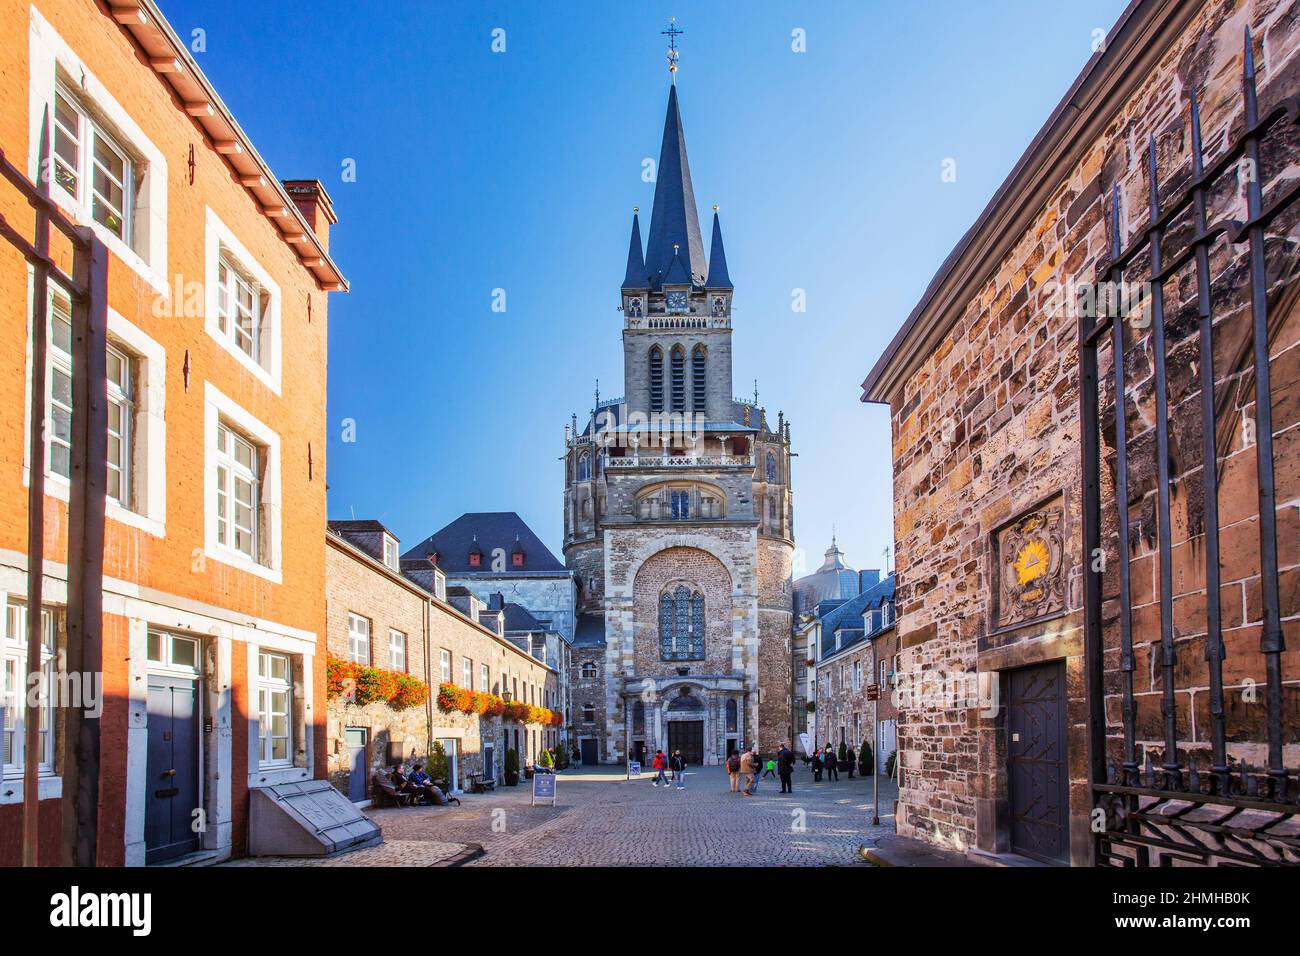 Domhof with westwork and tower of the Kaiserdom, Aachen, North Rhine-Westphalia, Germany Stock Photo